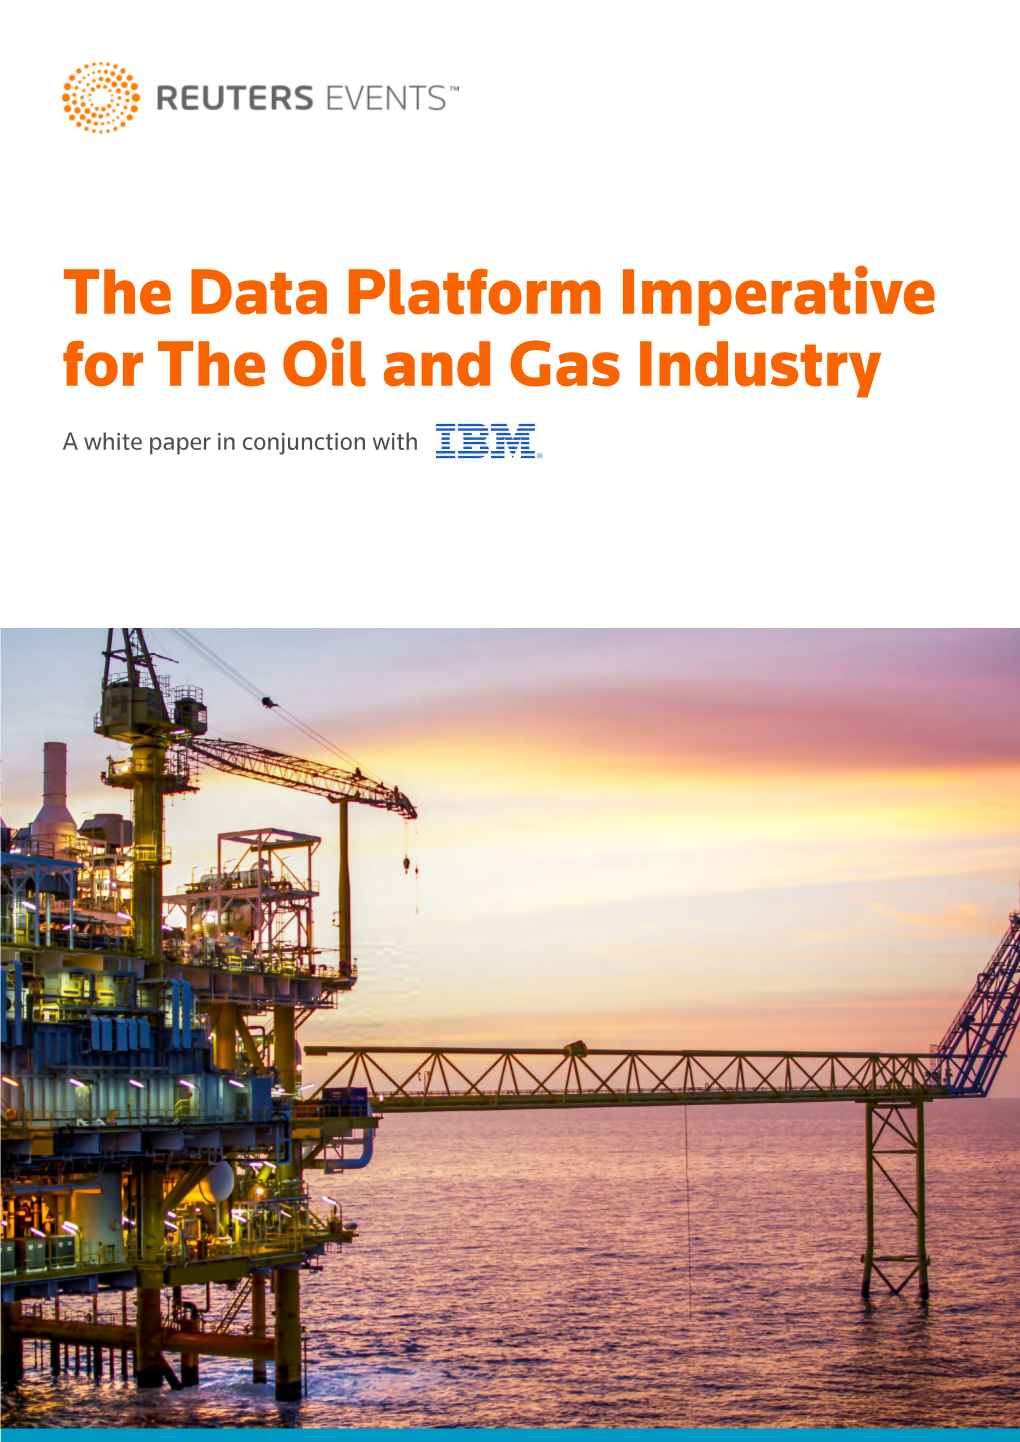 The Data Platform Imperative for the Oil and Gas Industry